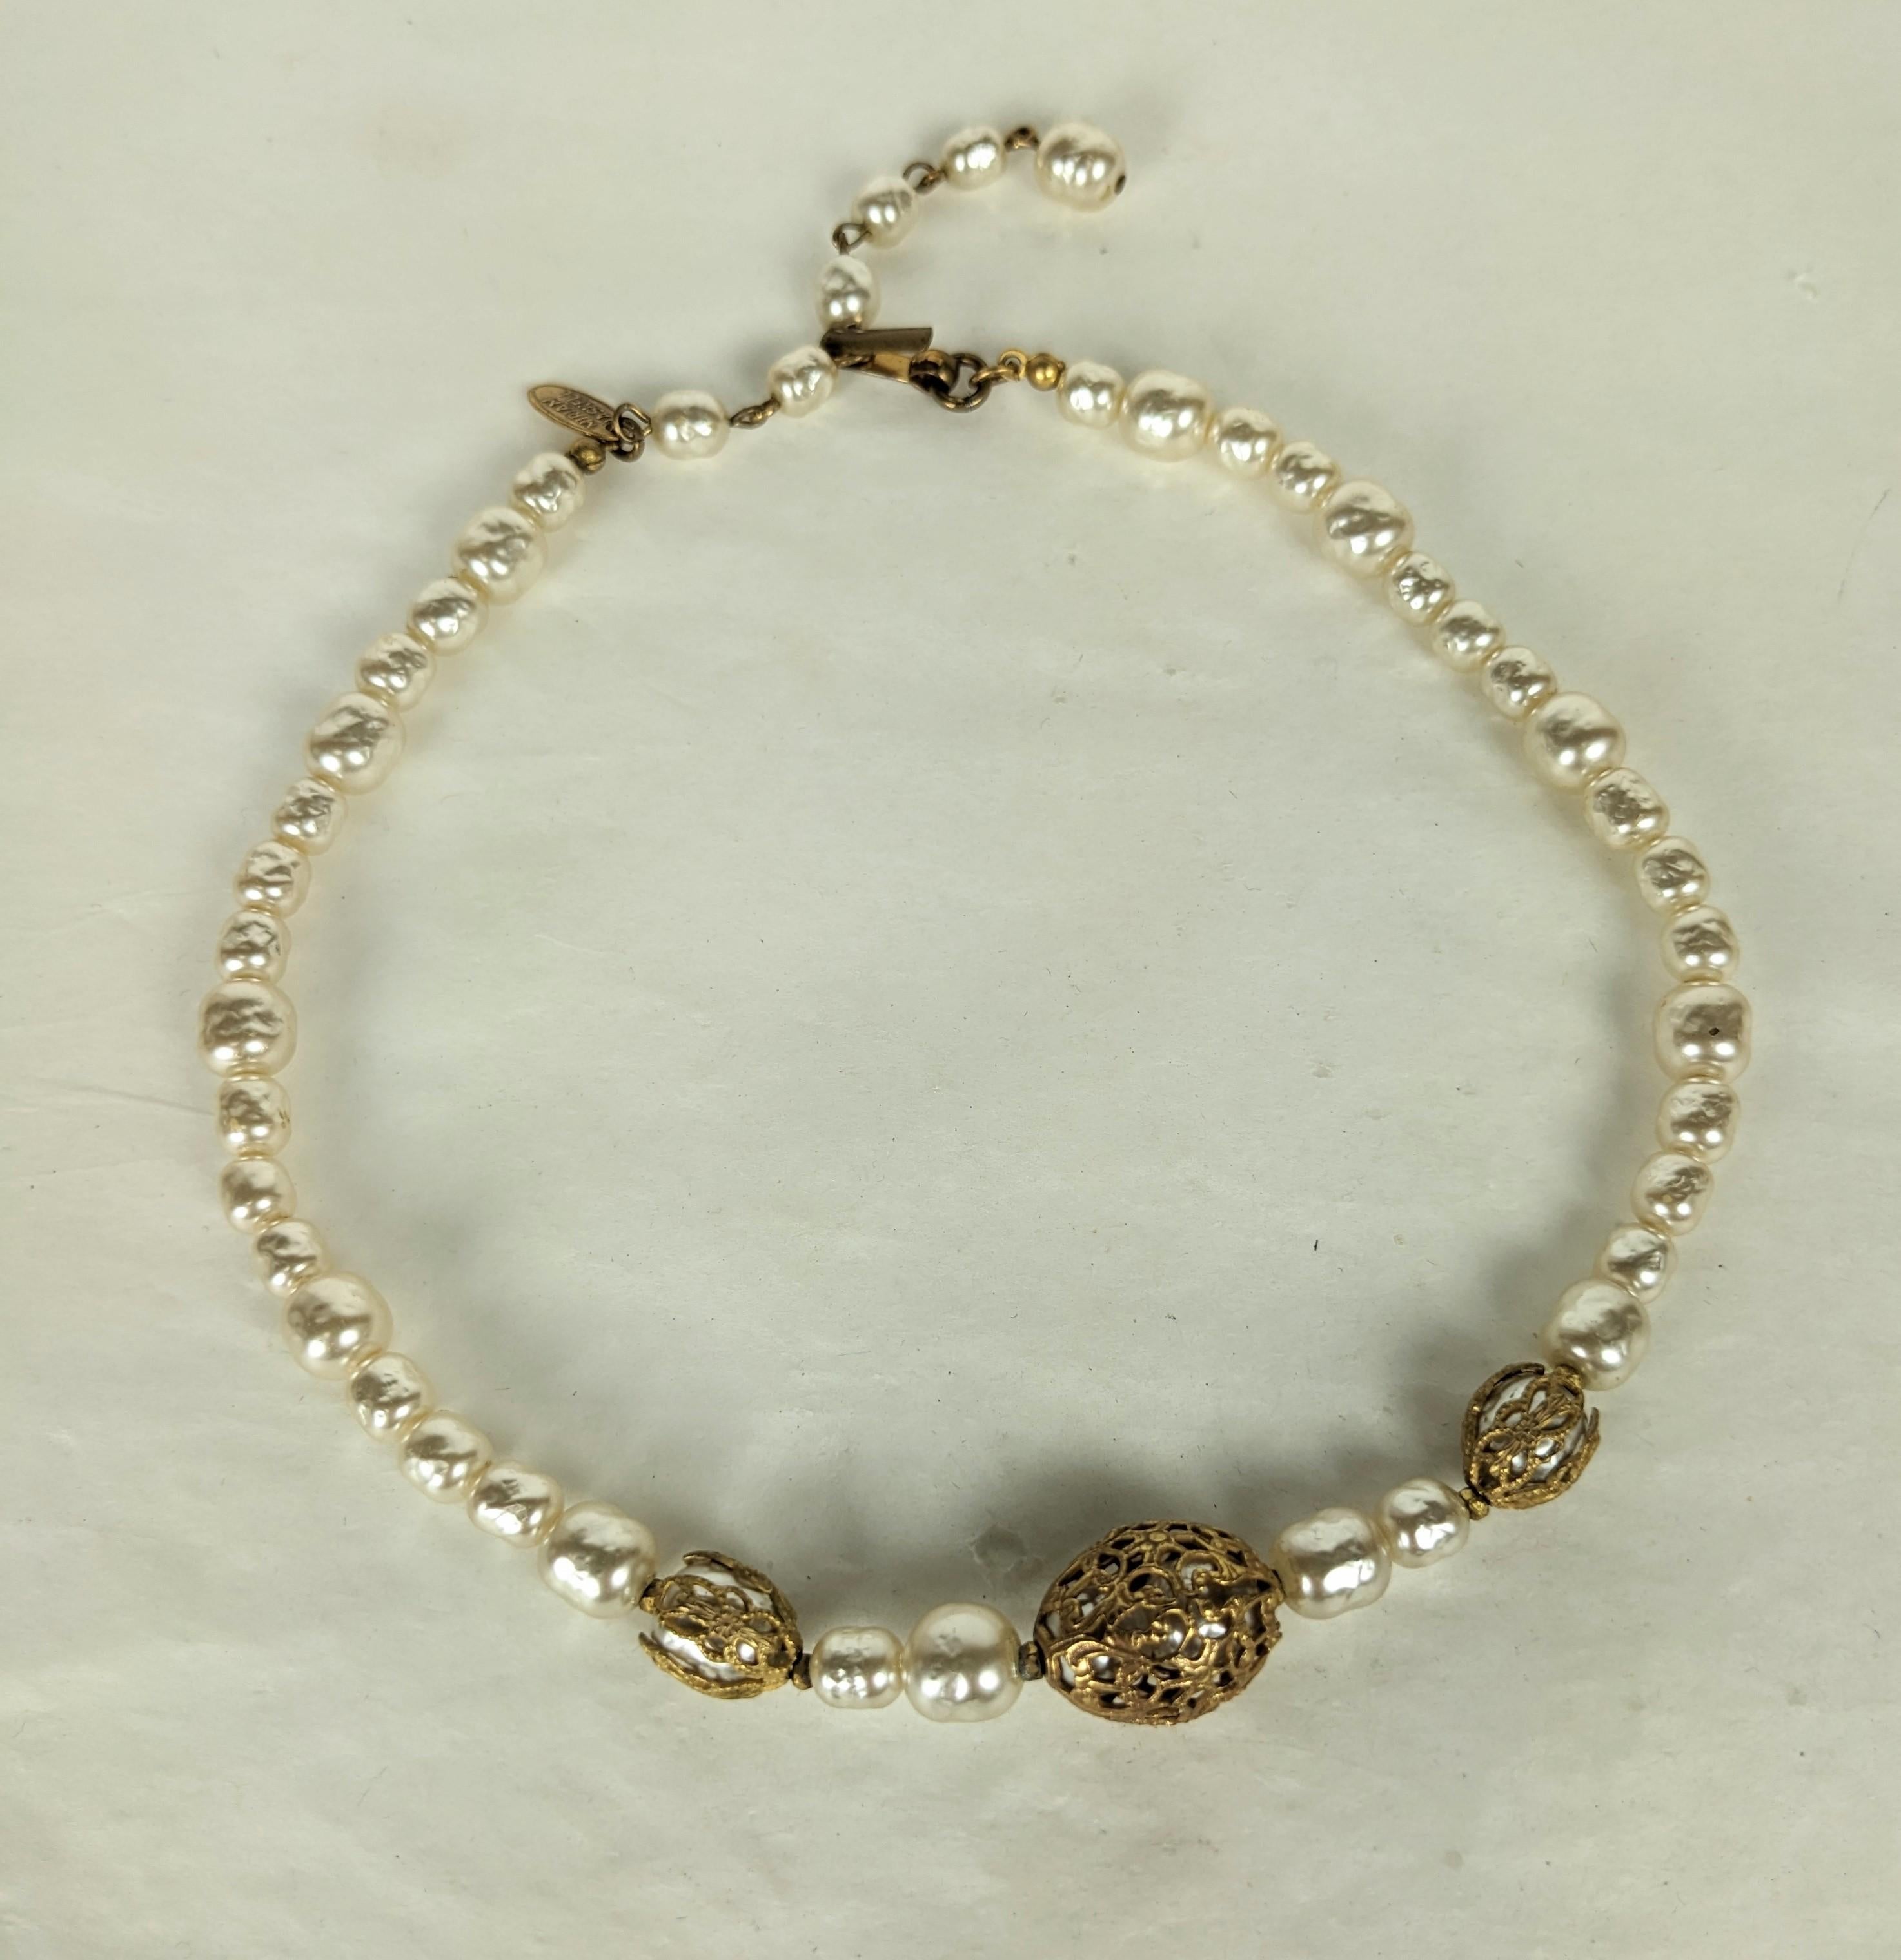 Elegant Miriam Haskell signature baroque pearl and Russian gold plate filigree choker necklace with caged pearls wrapped in filigree caps. Hook clasp and extender. Excellent Condition, Signed. Length 14.25